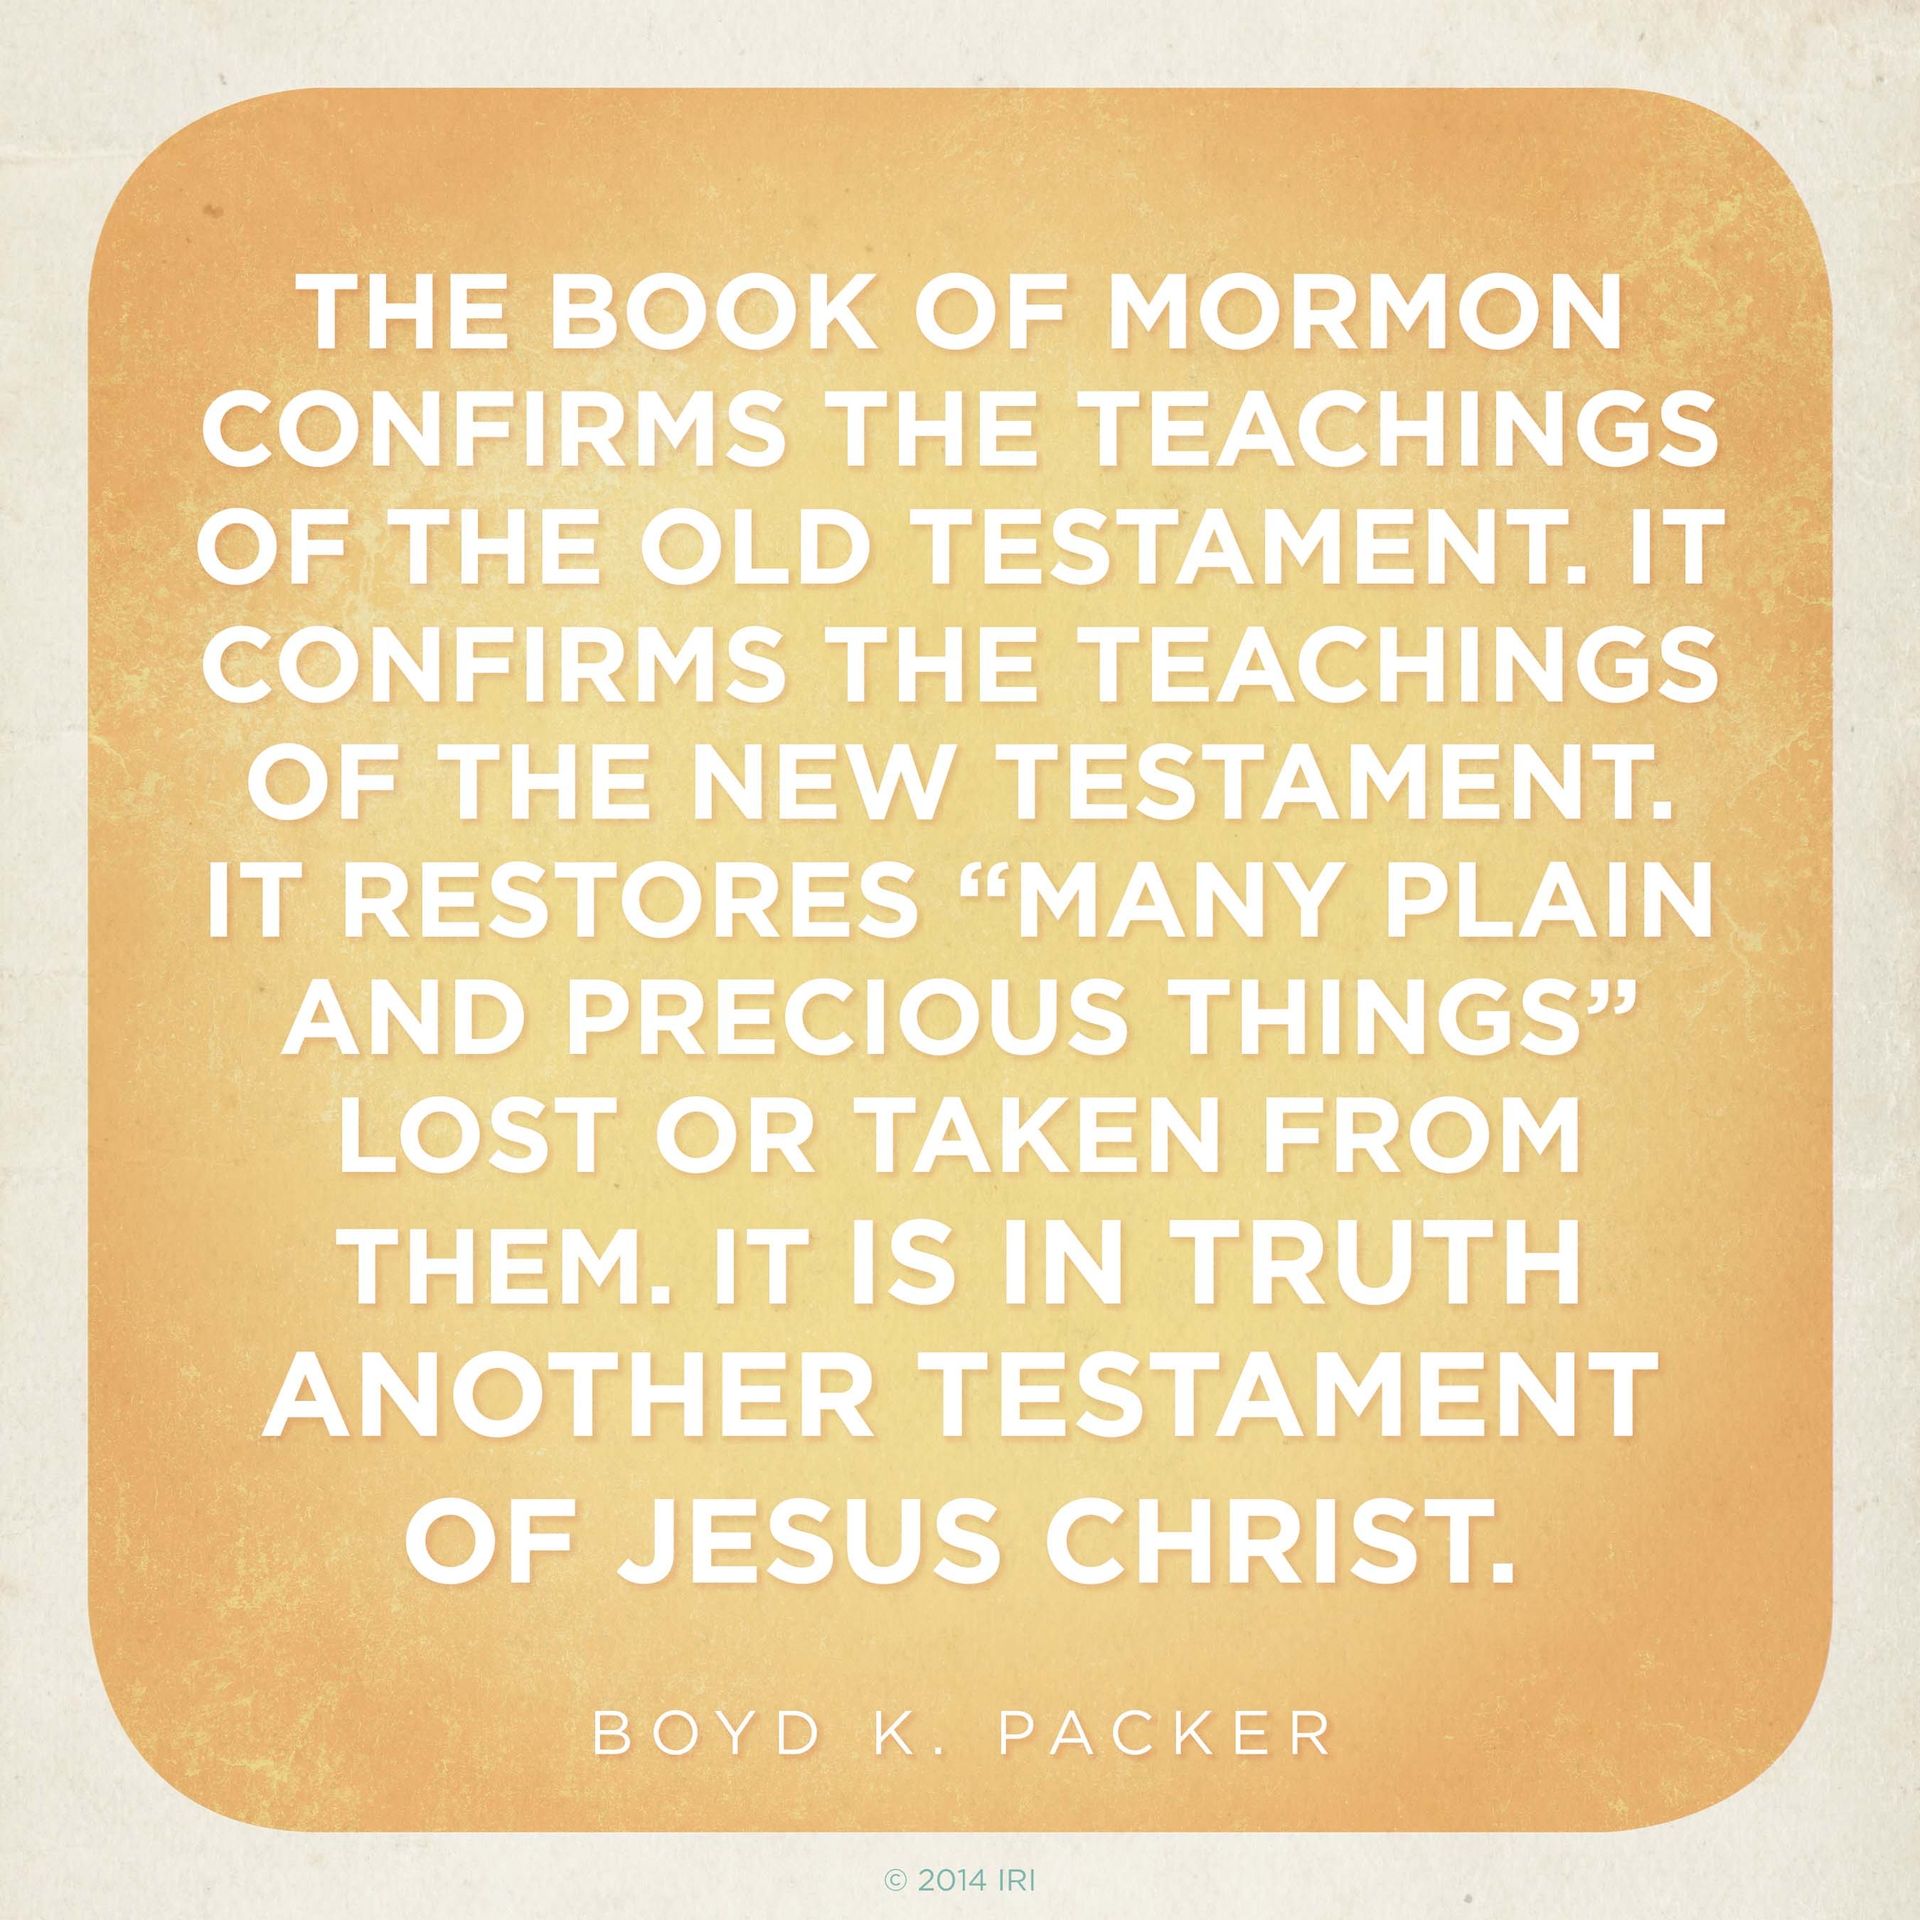 “The Book of Mormon confirms the teachings of the Old Testament. It confirms the teachings of the New Testament. It restores ‘many plain and precious things’ lost or taken from them. It is in truth another testament of Jesus Christ.”—President Boyd K. Packer, “The Book of Mormon: Another Testament of Jesus Christ—Plain and Precious Things”